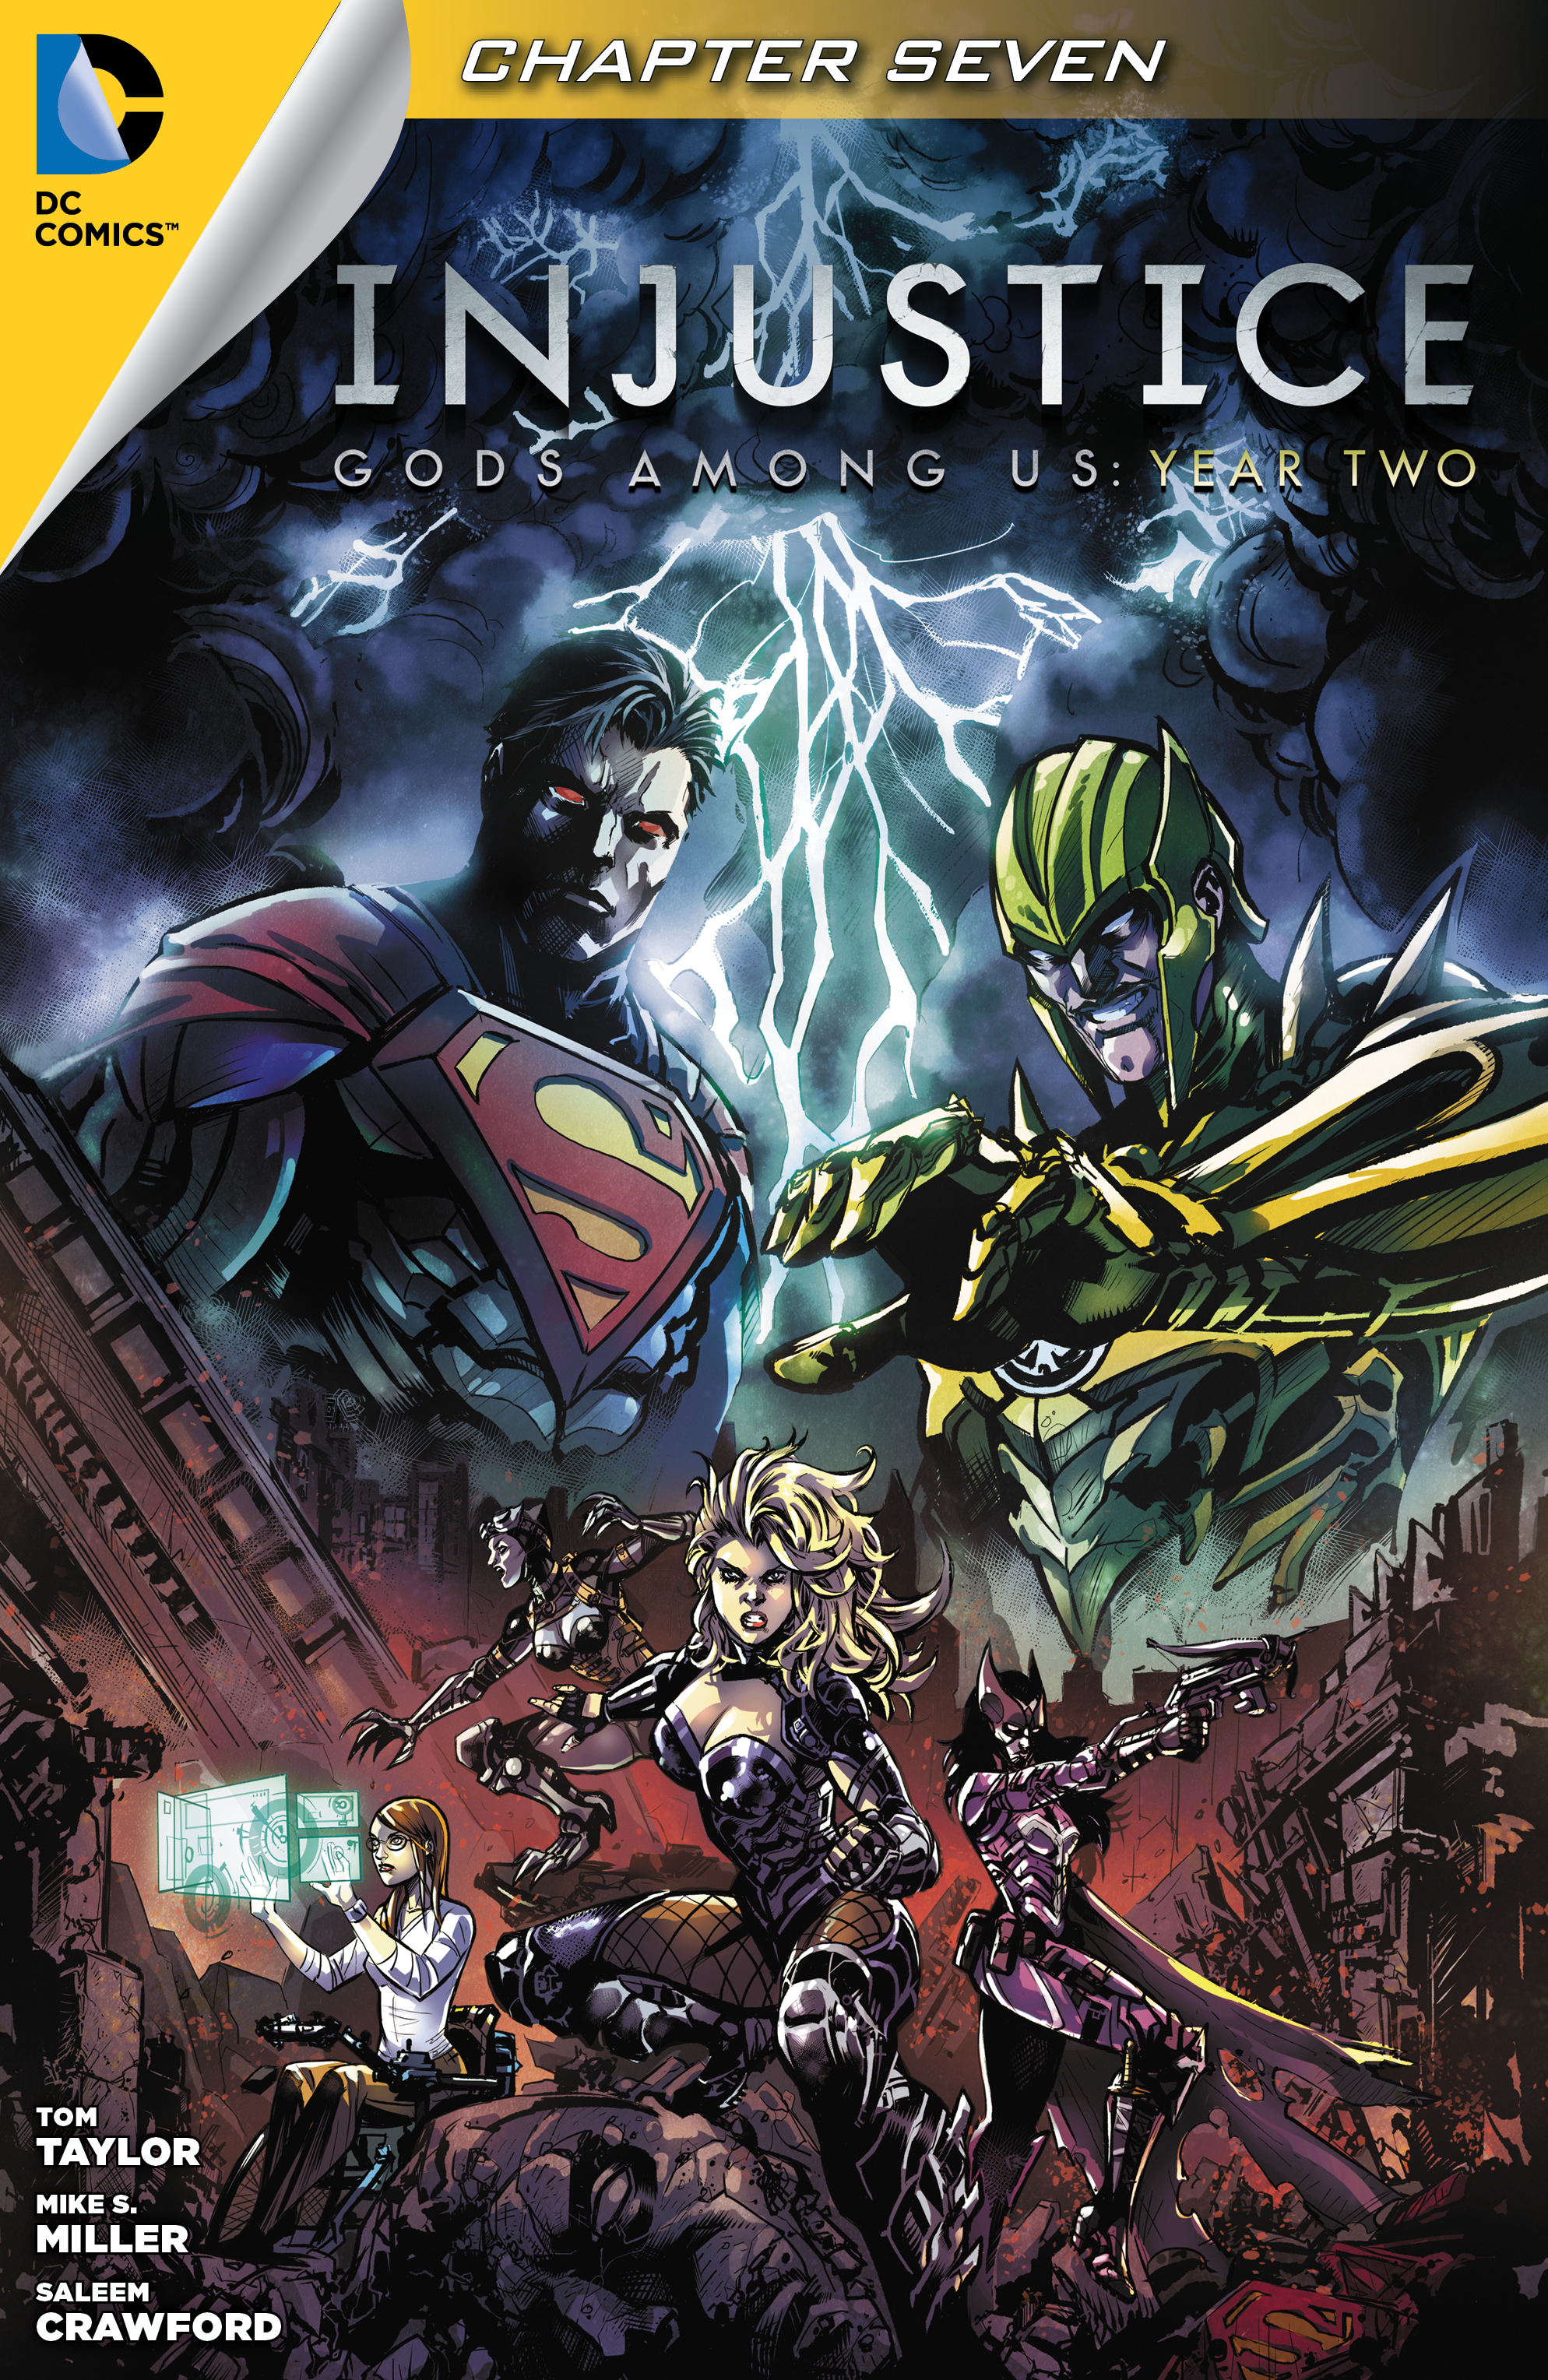 Injustice: Gods Among Us: Year Two #7 preview images